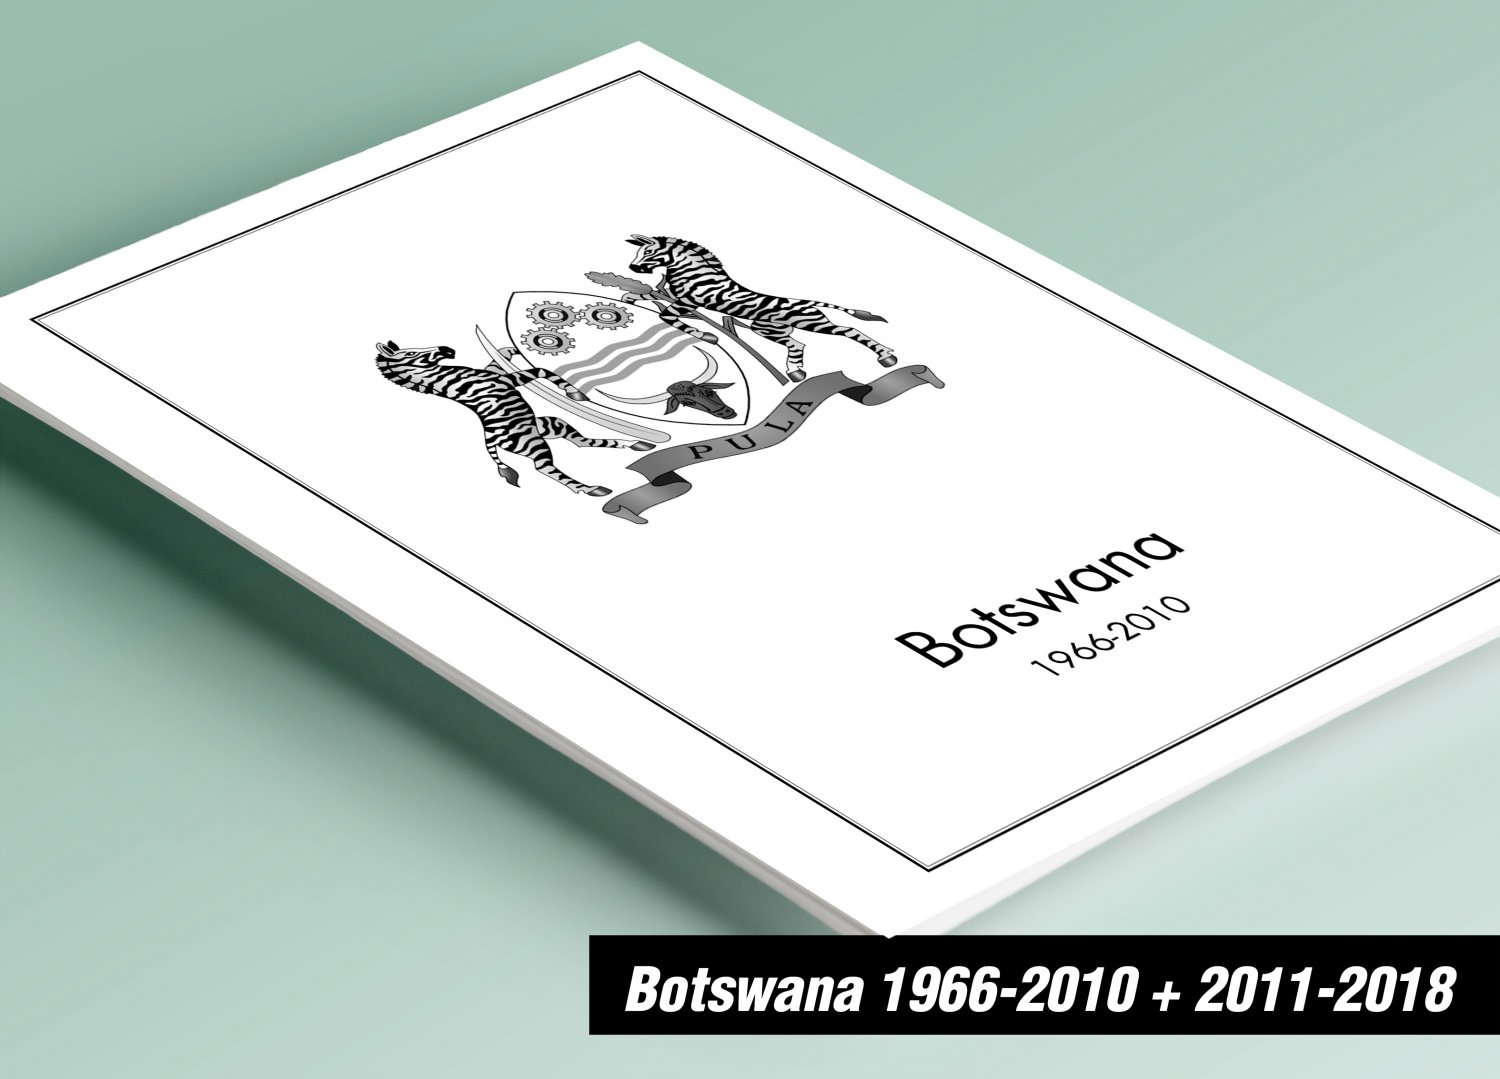 PRINTED BOTSWANA 1966-2010 + 2011-2018 STAMP ALBUM PAGES (163 pages)